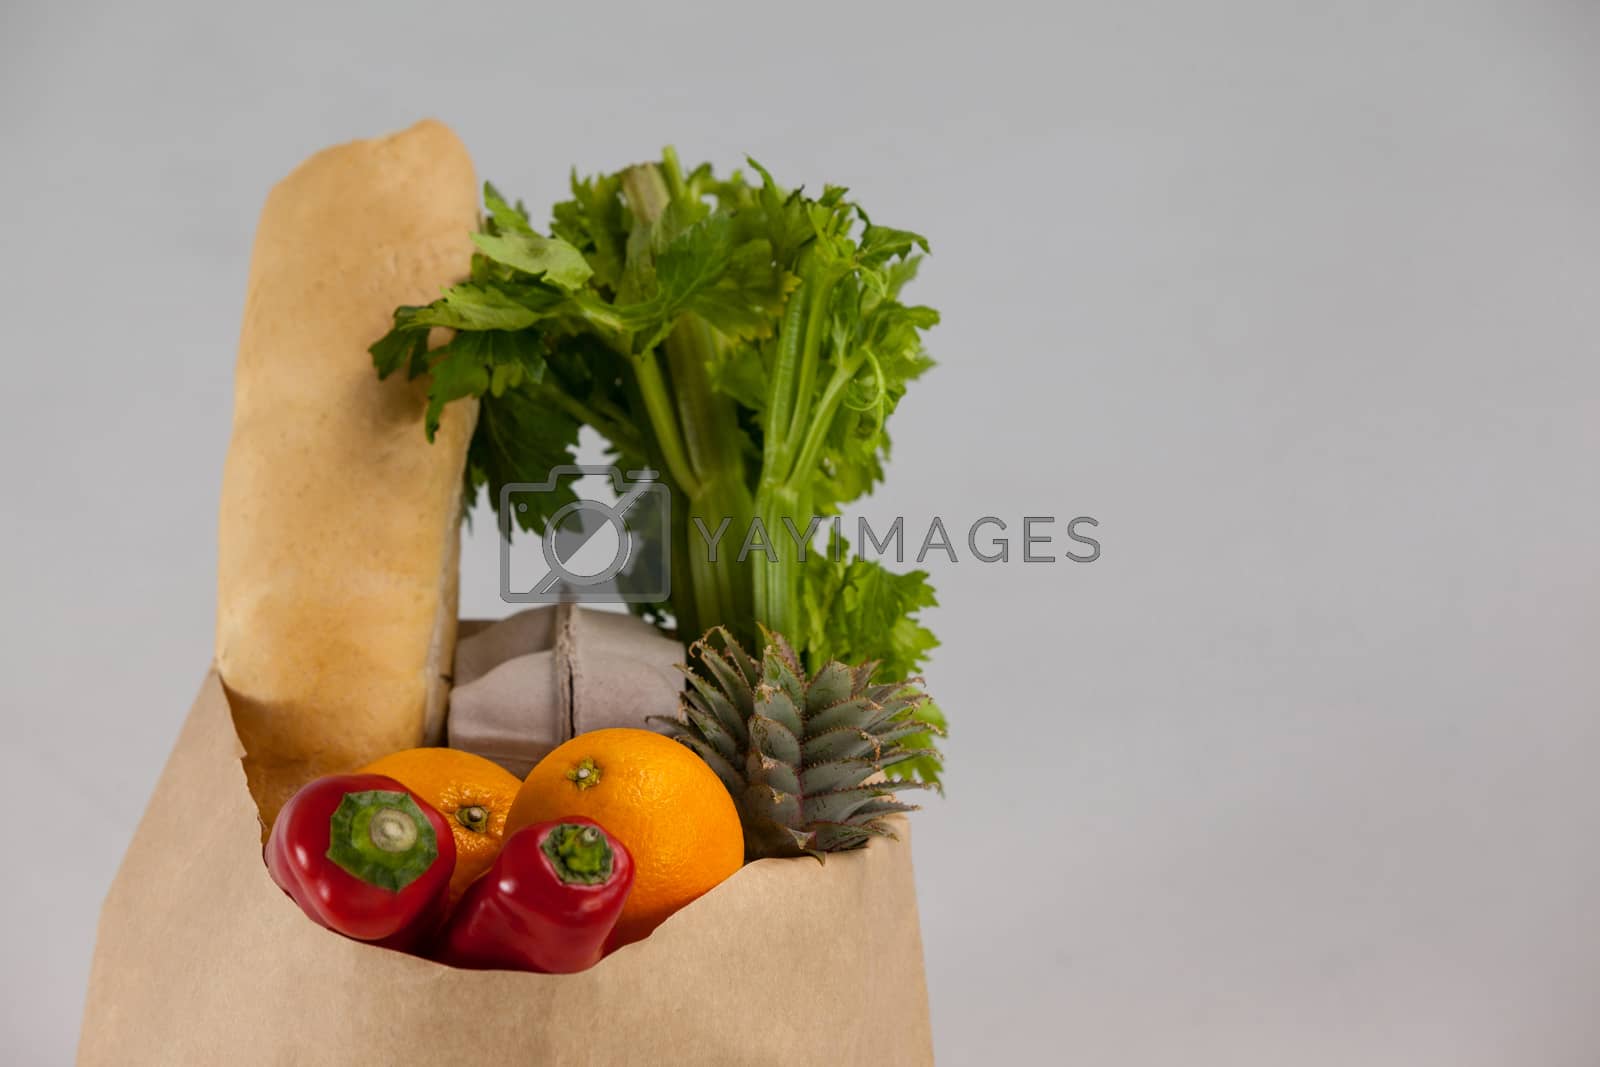 Royalty free image of Fruits and vegetables in brown grocery bag by Wavebreakmedia